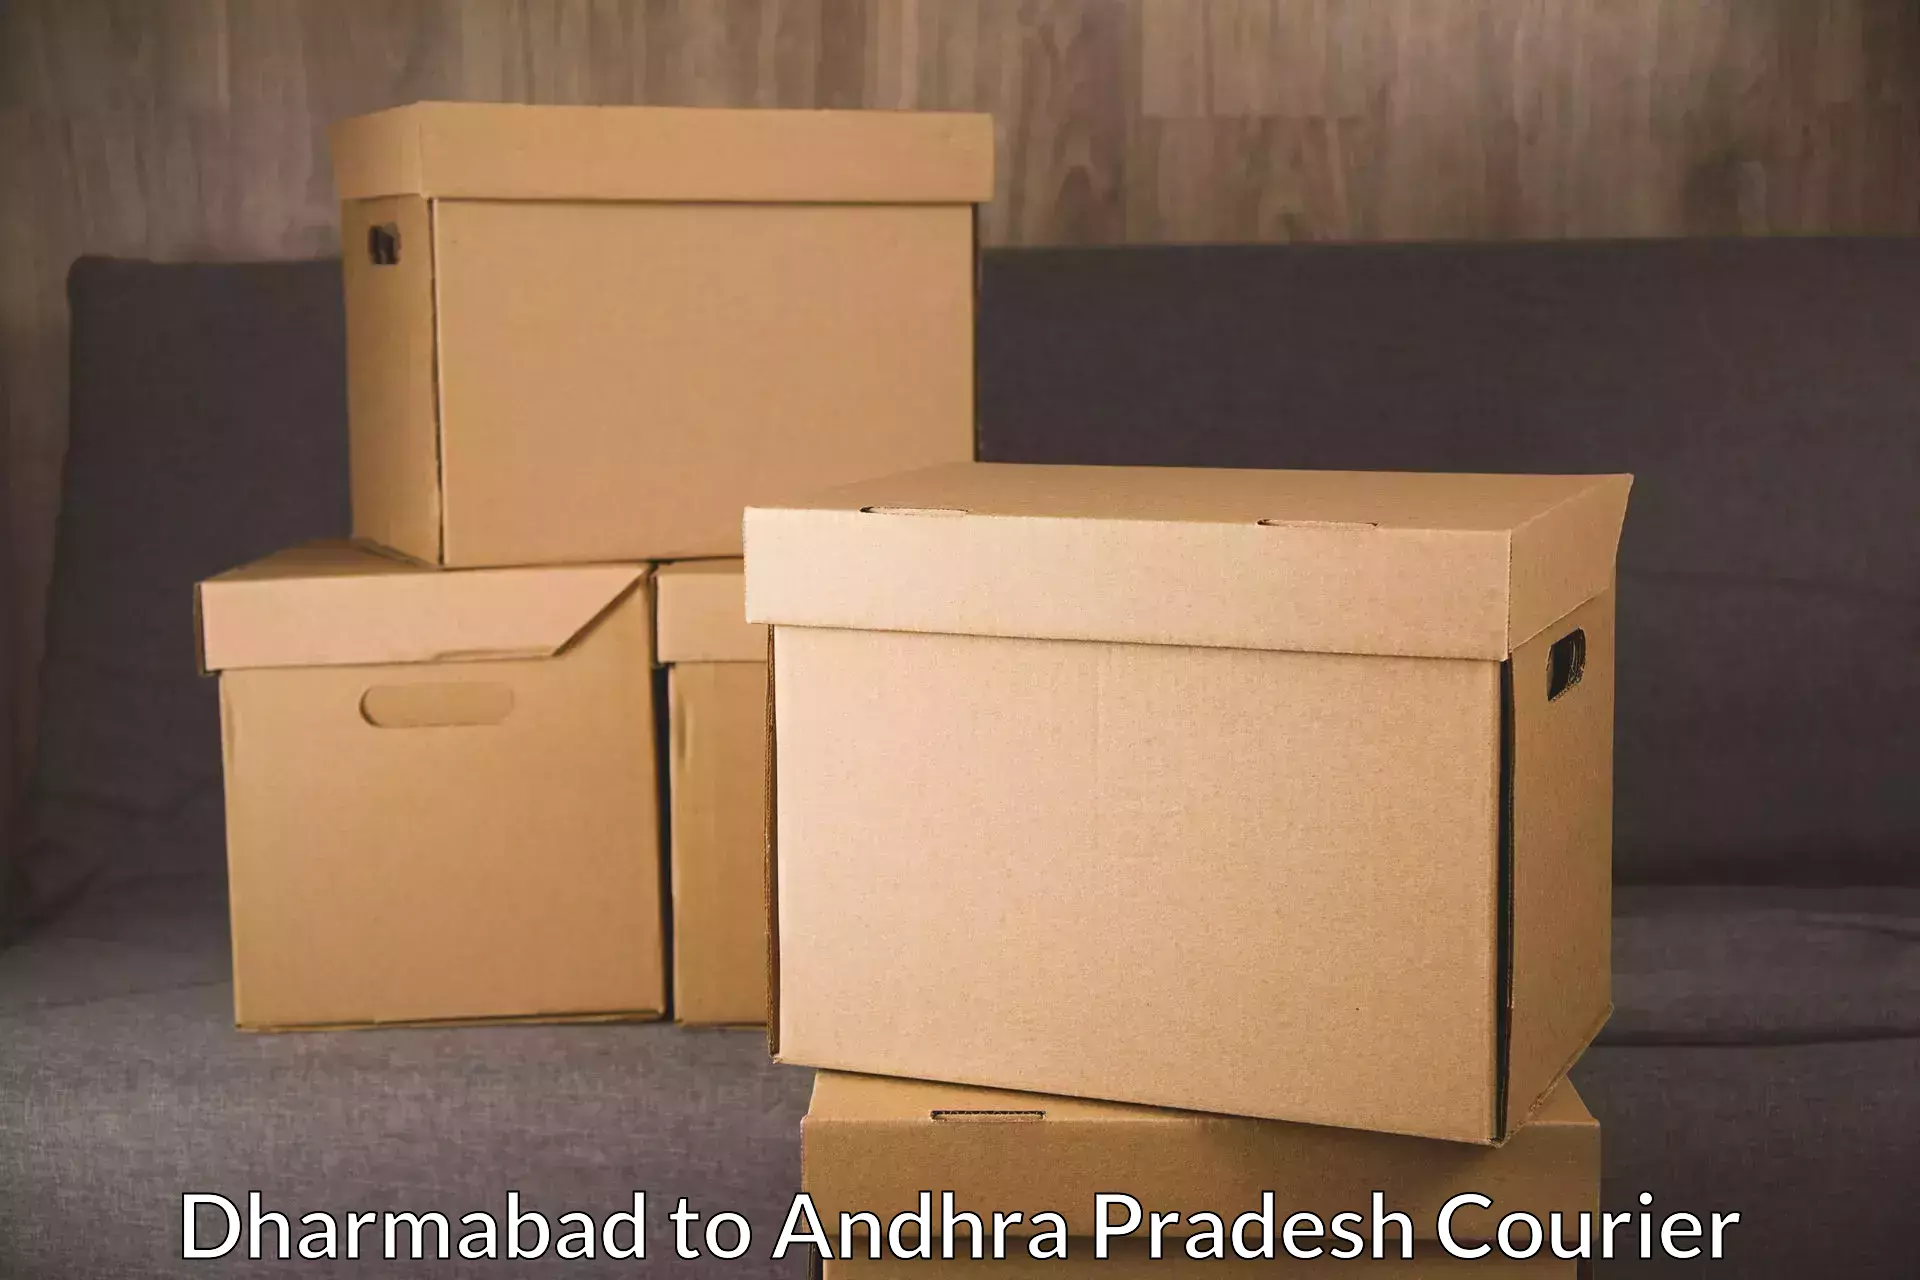 Courier service comparison Dharmabad to Visakhapatnam Port